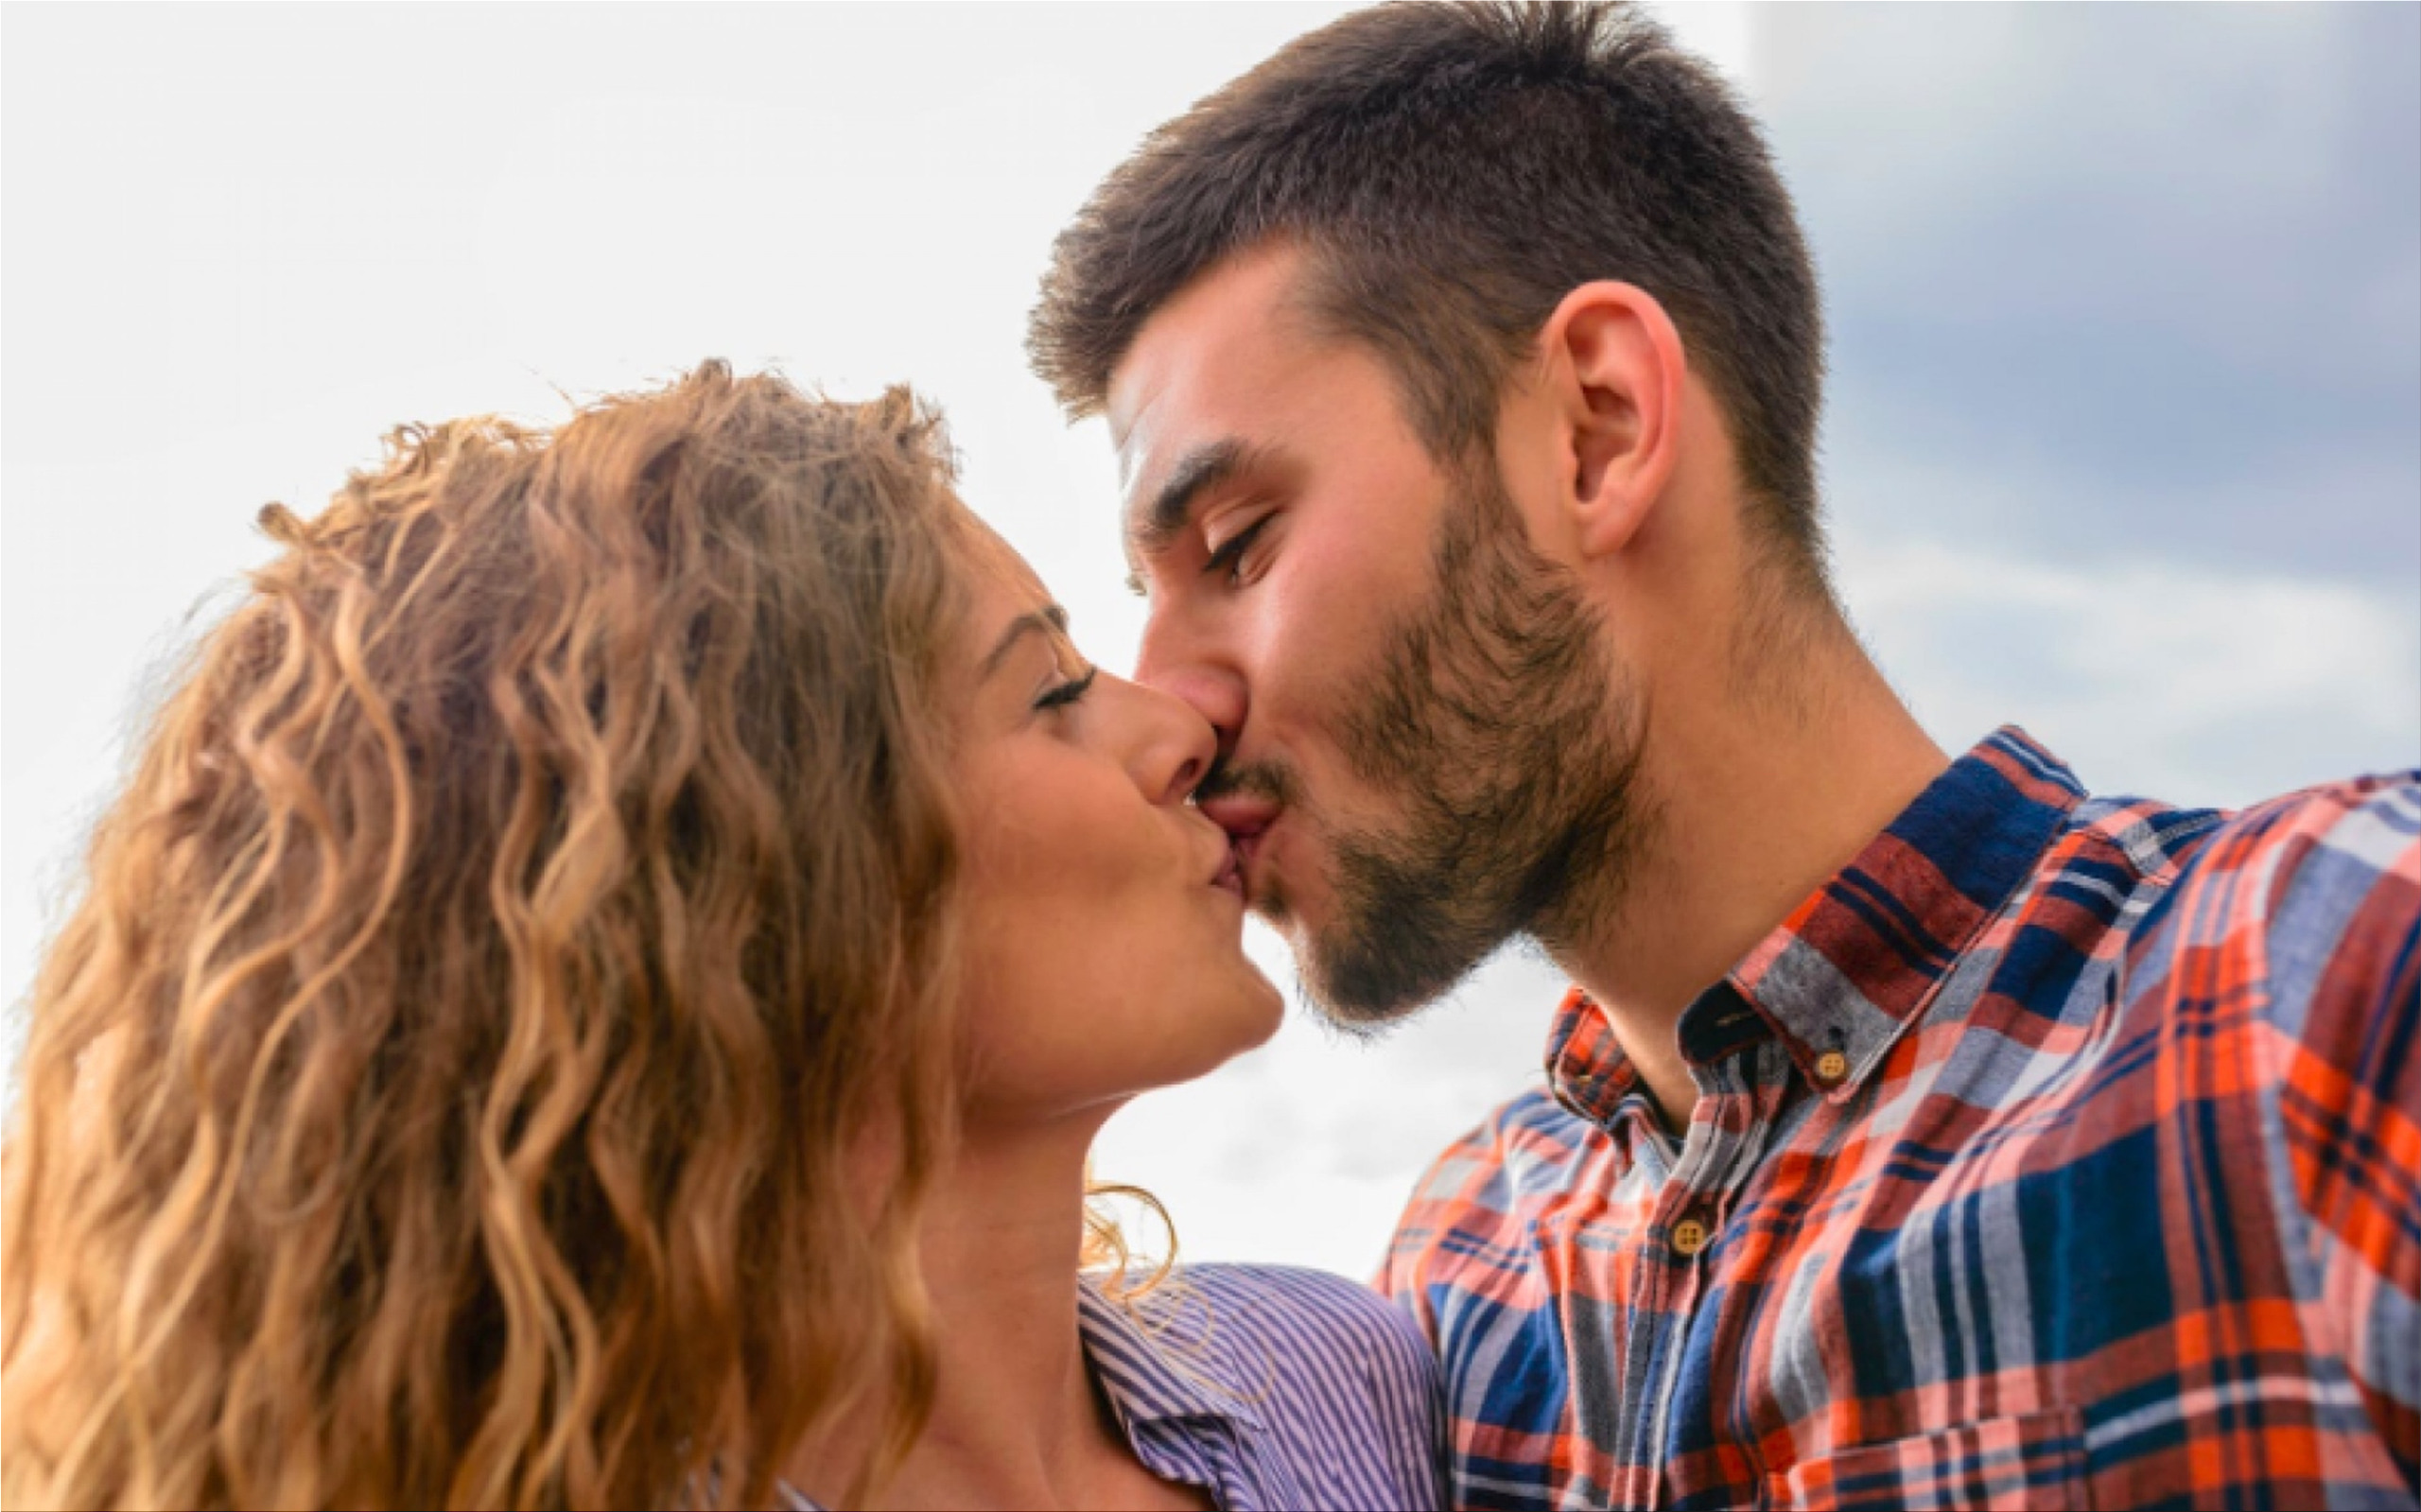 Lack of Kissing in Marriage: Is It a Red Flag or a Personal Preference?